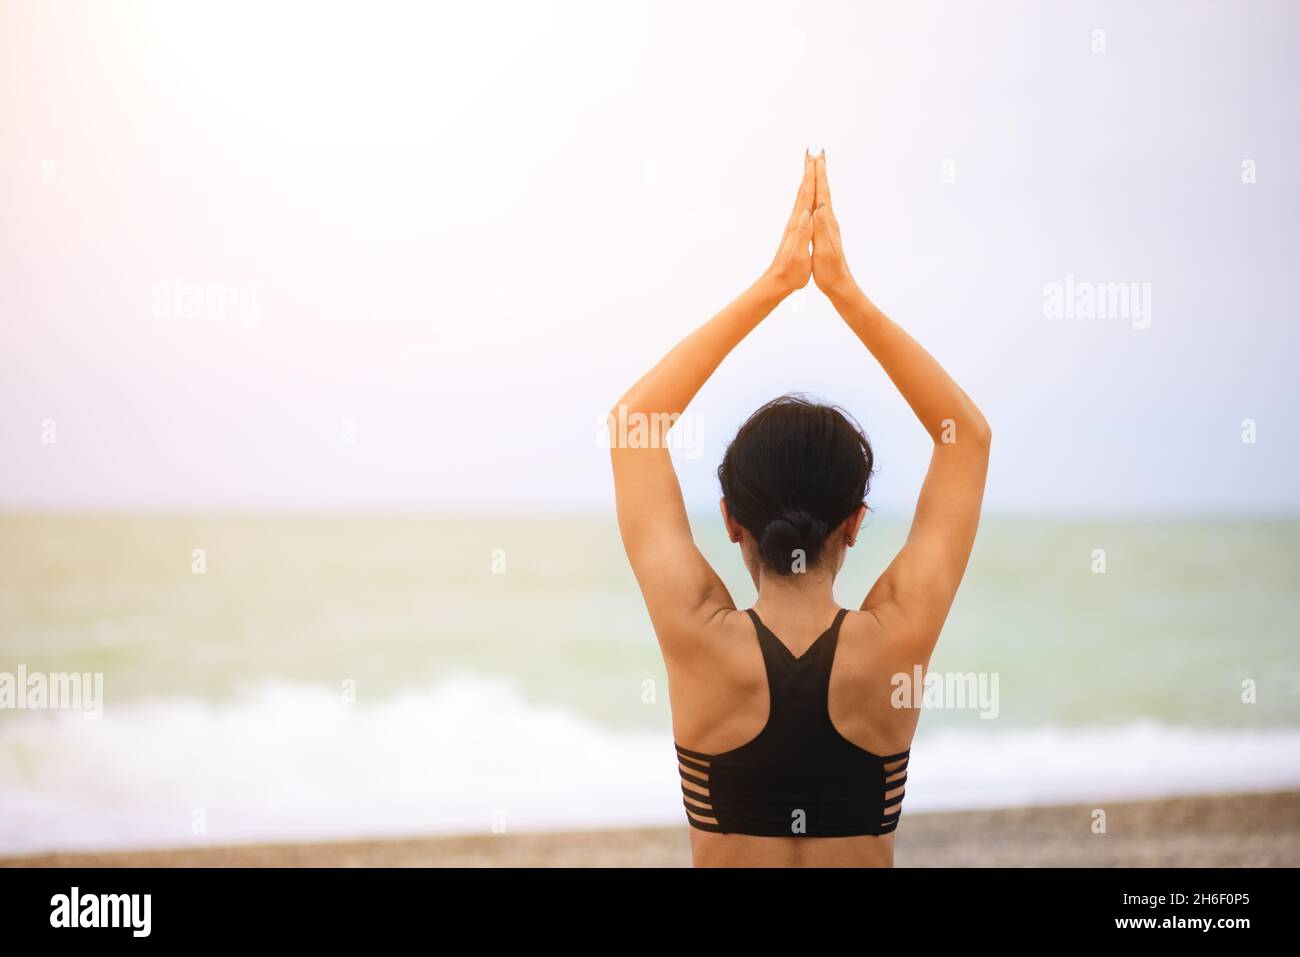 Back view portrait of woman stretching her arms up. Stock Photo